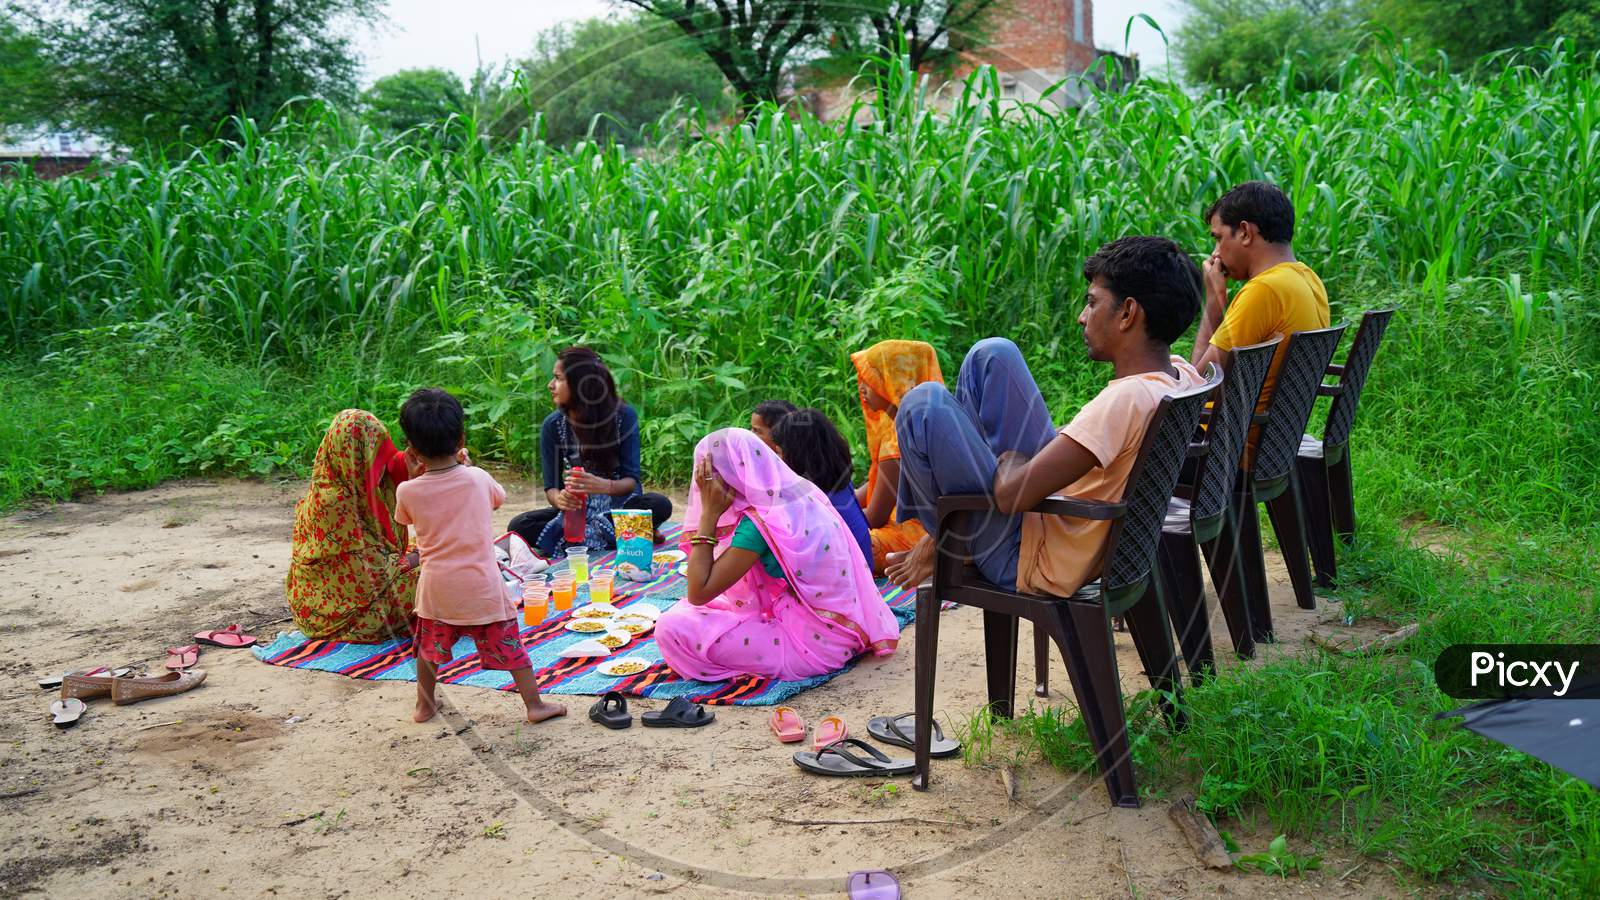 Close up view of traditional Indian family sitting in agriculture farmland.